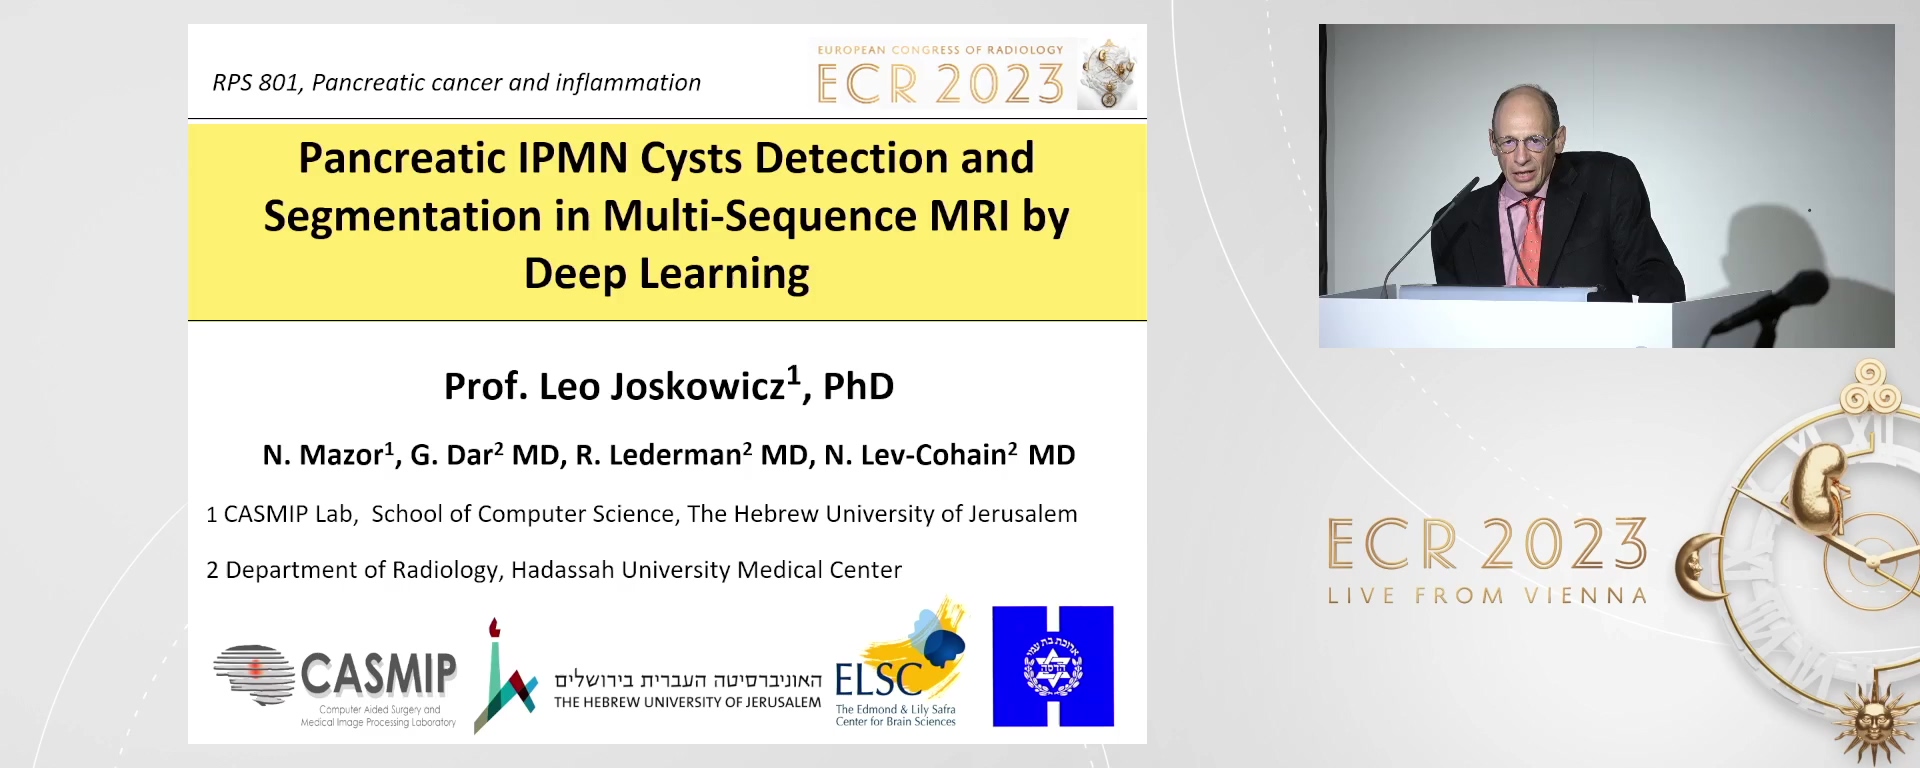 Pancreatic IPMN cysts detection and segmentation in multi-sequence MRI by deep learning